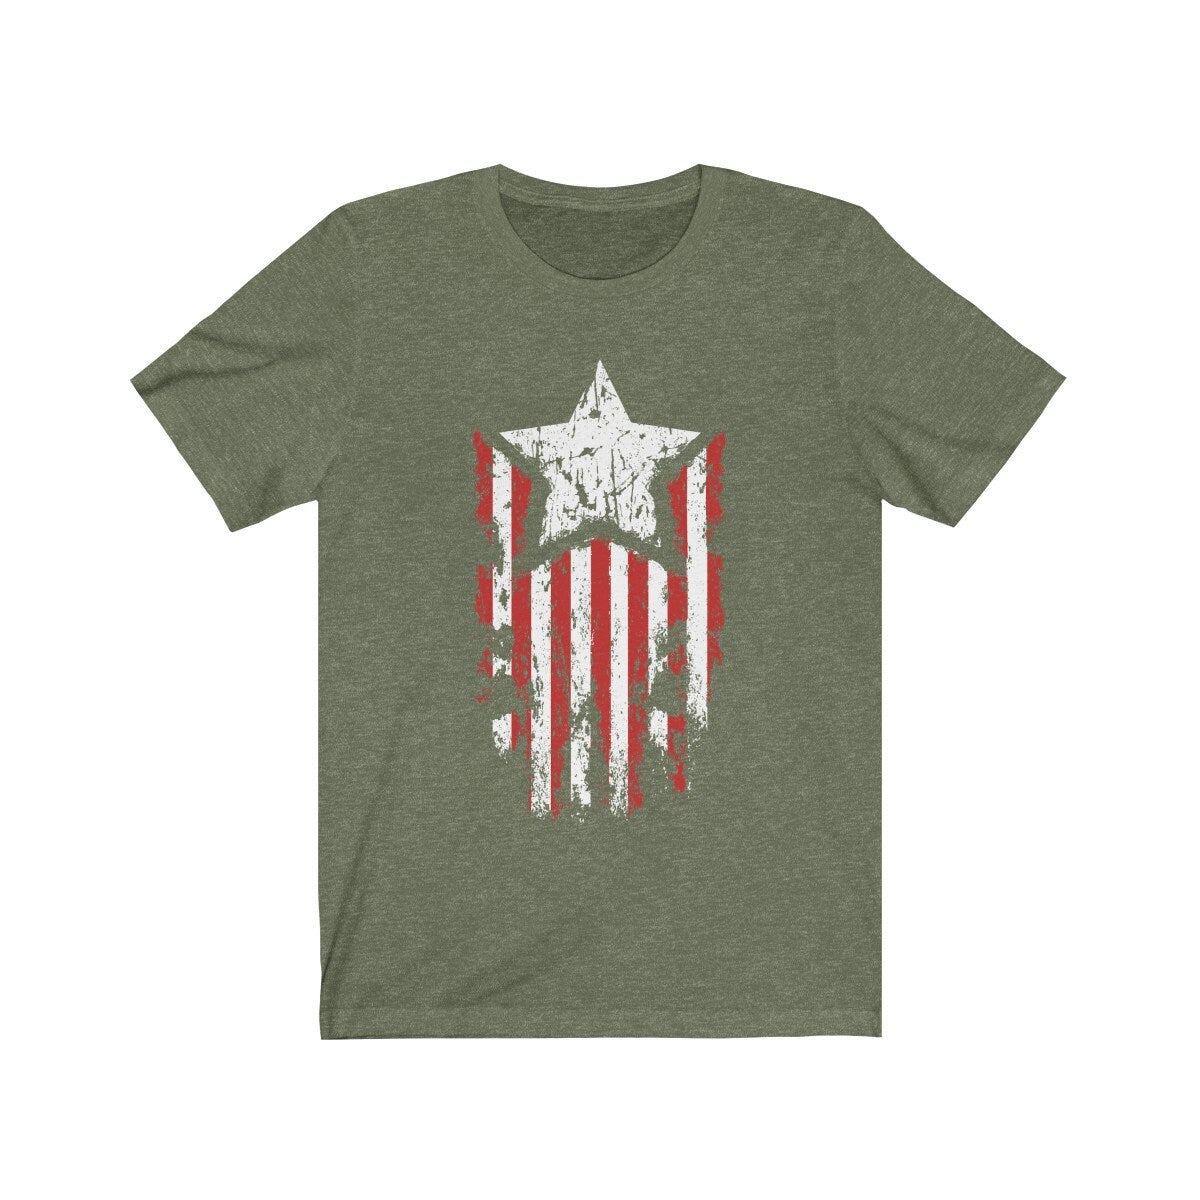 Patriotic Birthday Gift T-Shirt for Men or Husband, American Flag with Star - 37 Design Unit